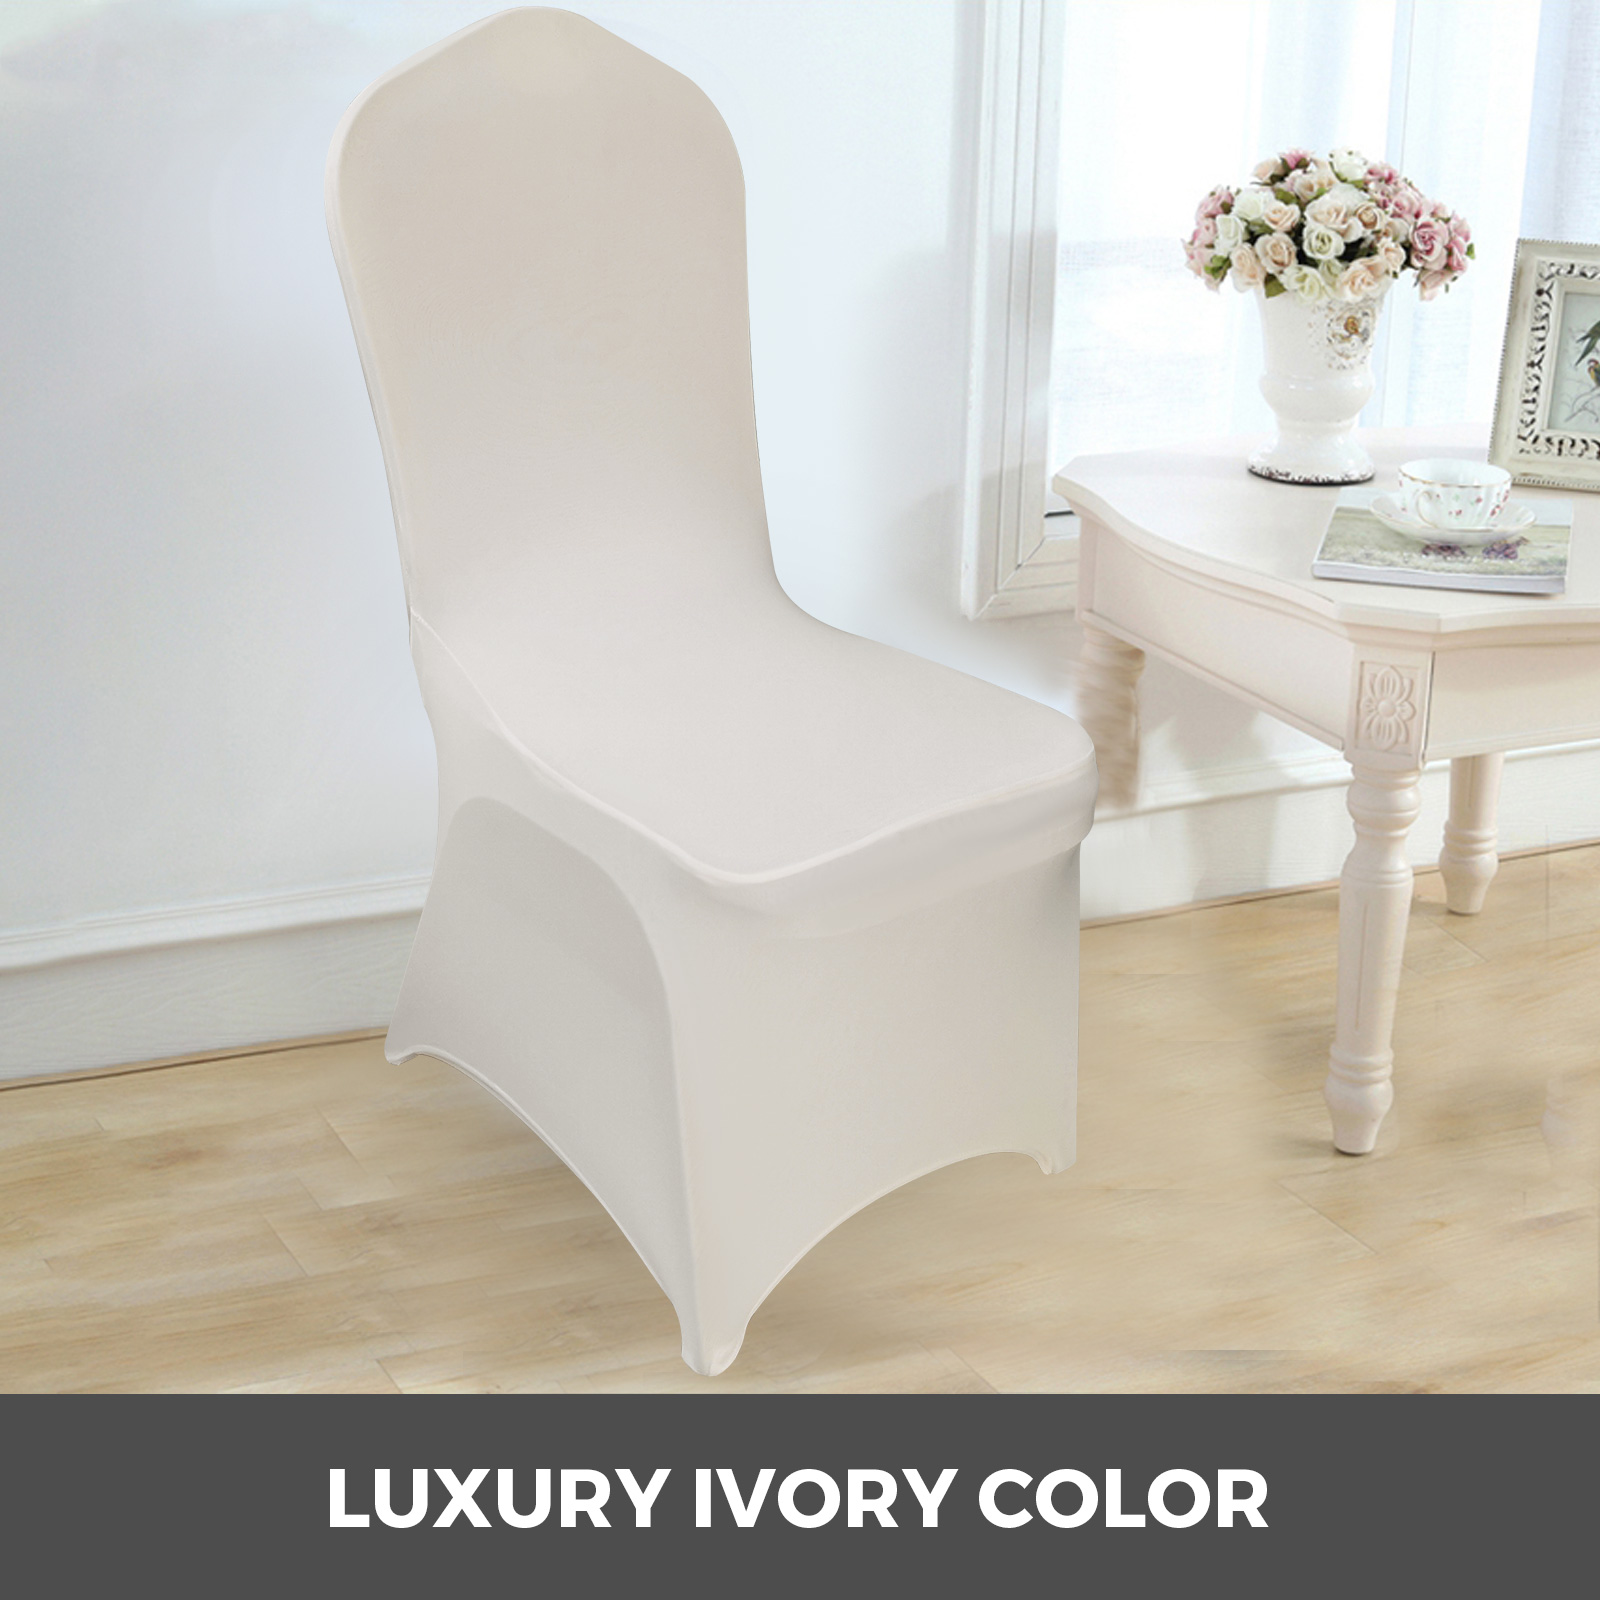 Lycra Chair Cover Banquet Party Wedding Decor 50 or 100 Packs of Ivory Spandex 